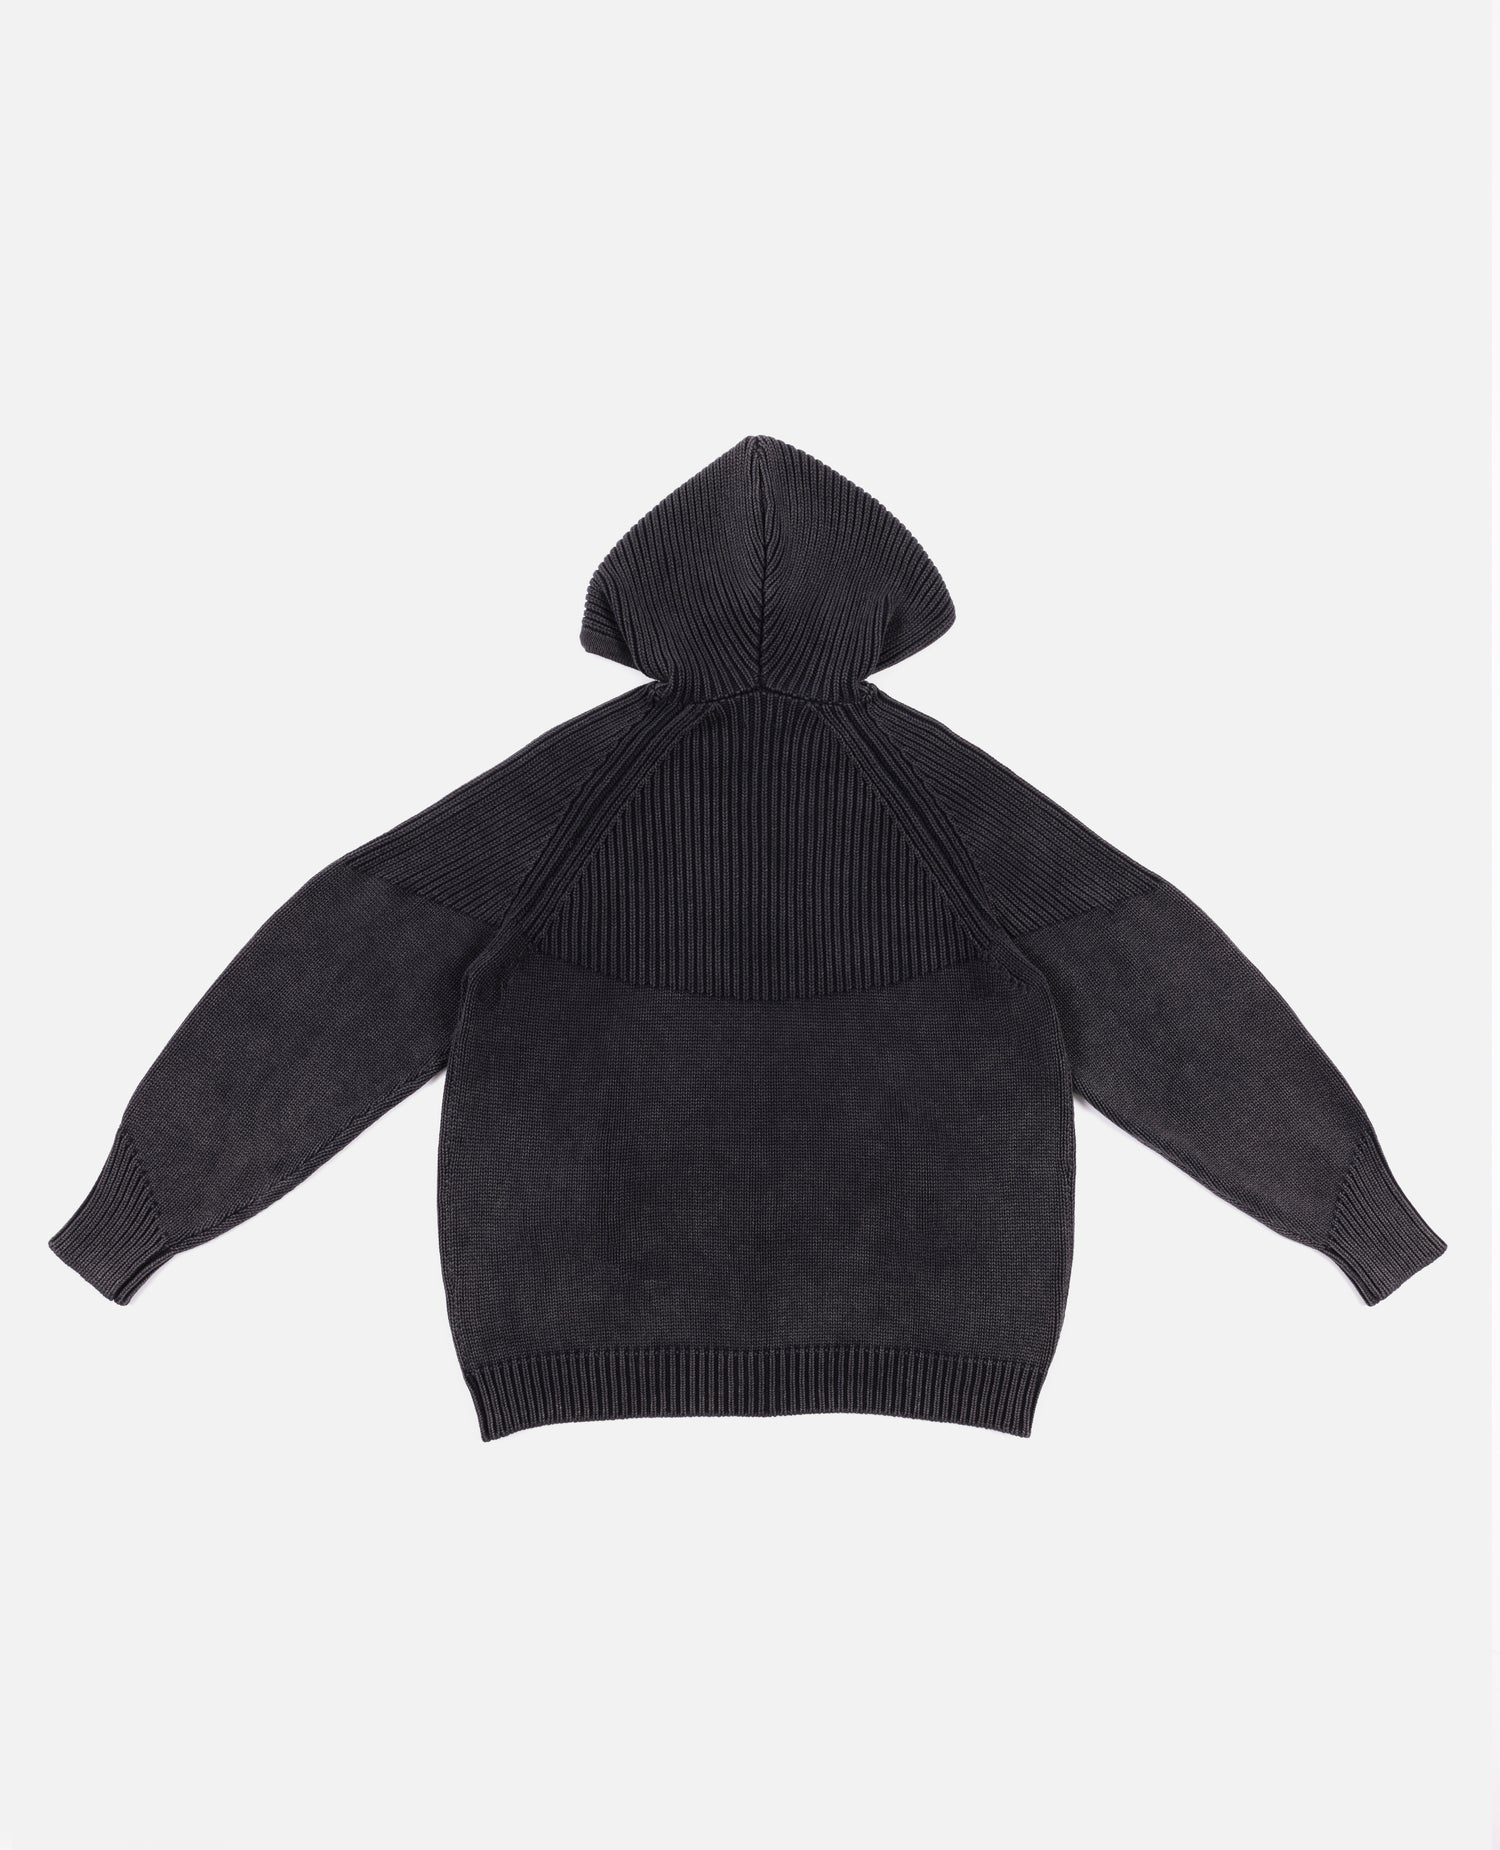 Patta Ribbed Knitted Zip Up Hooded Sweater (Black)